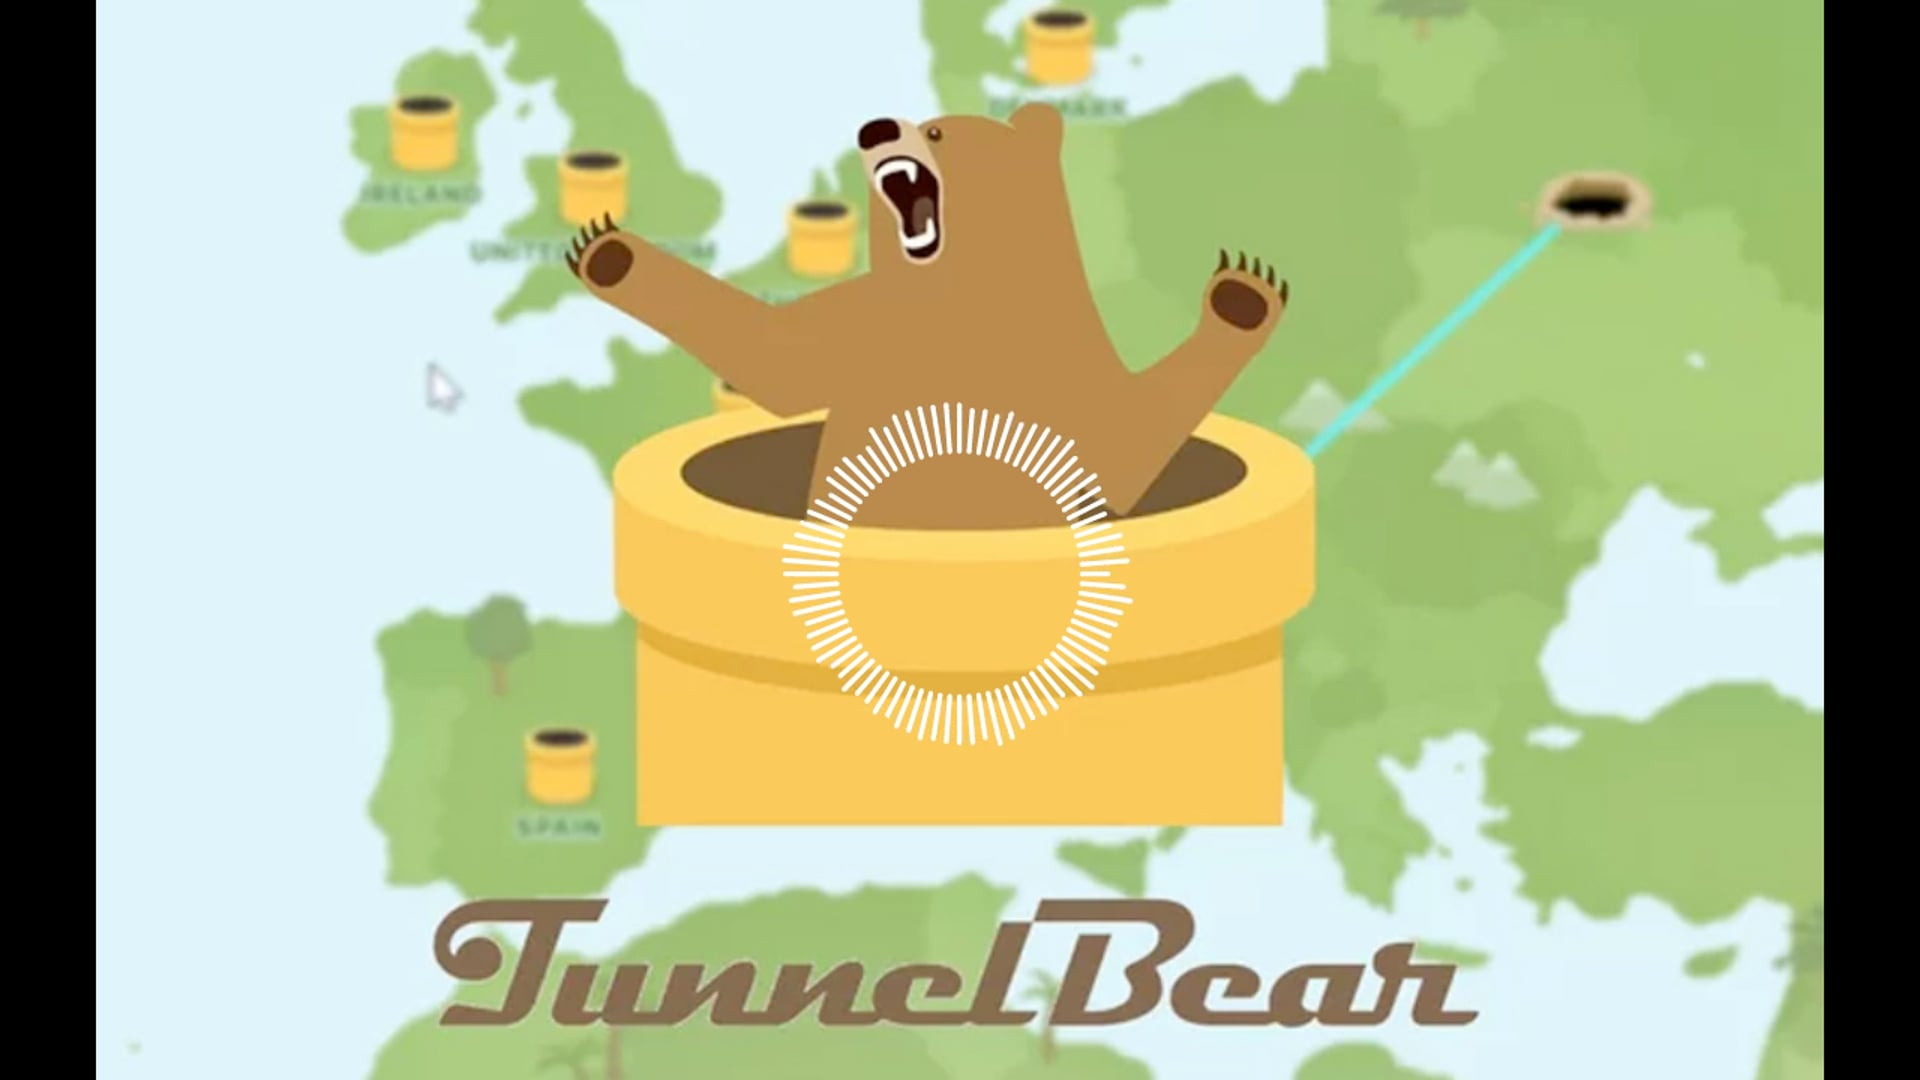 Tunnel Bear VPN - Work from Home - Digital Streaming Ad 30"